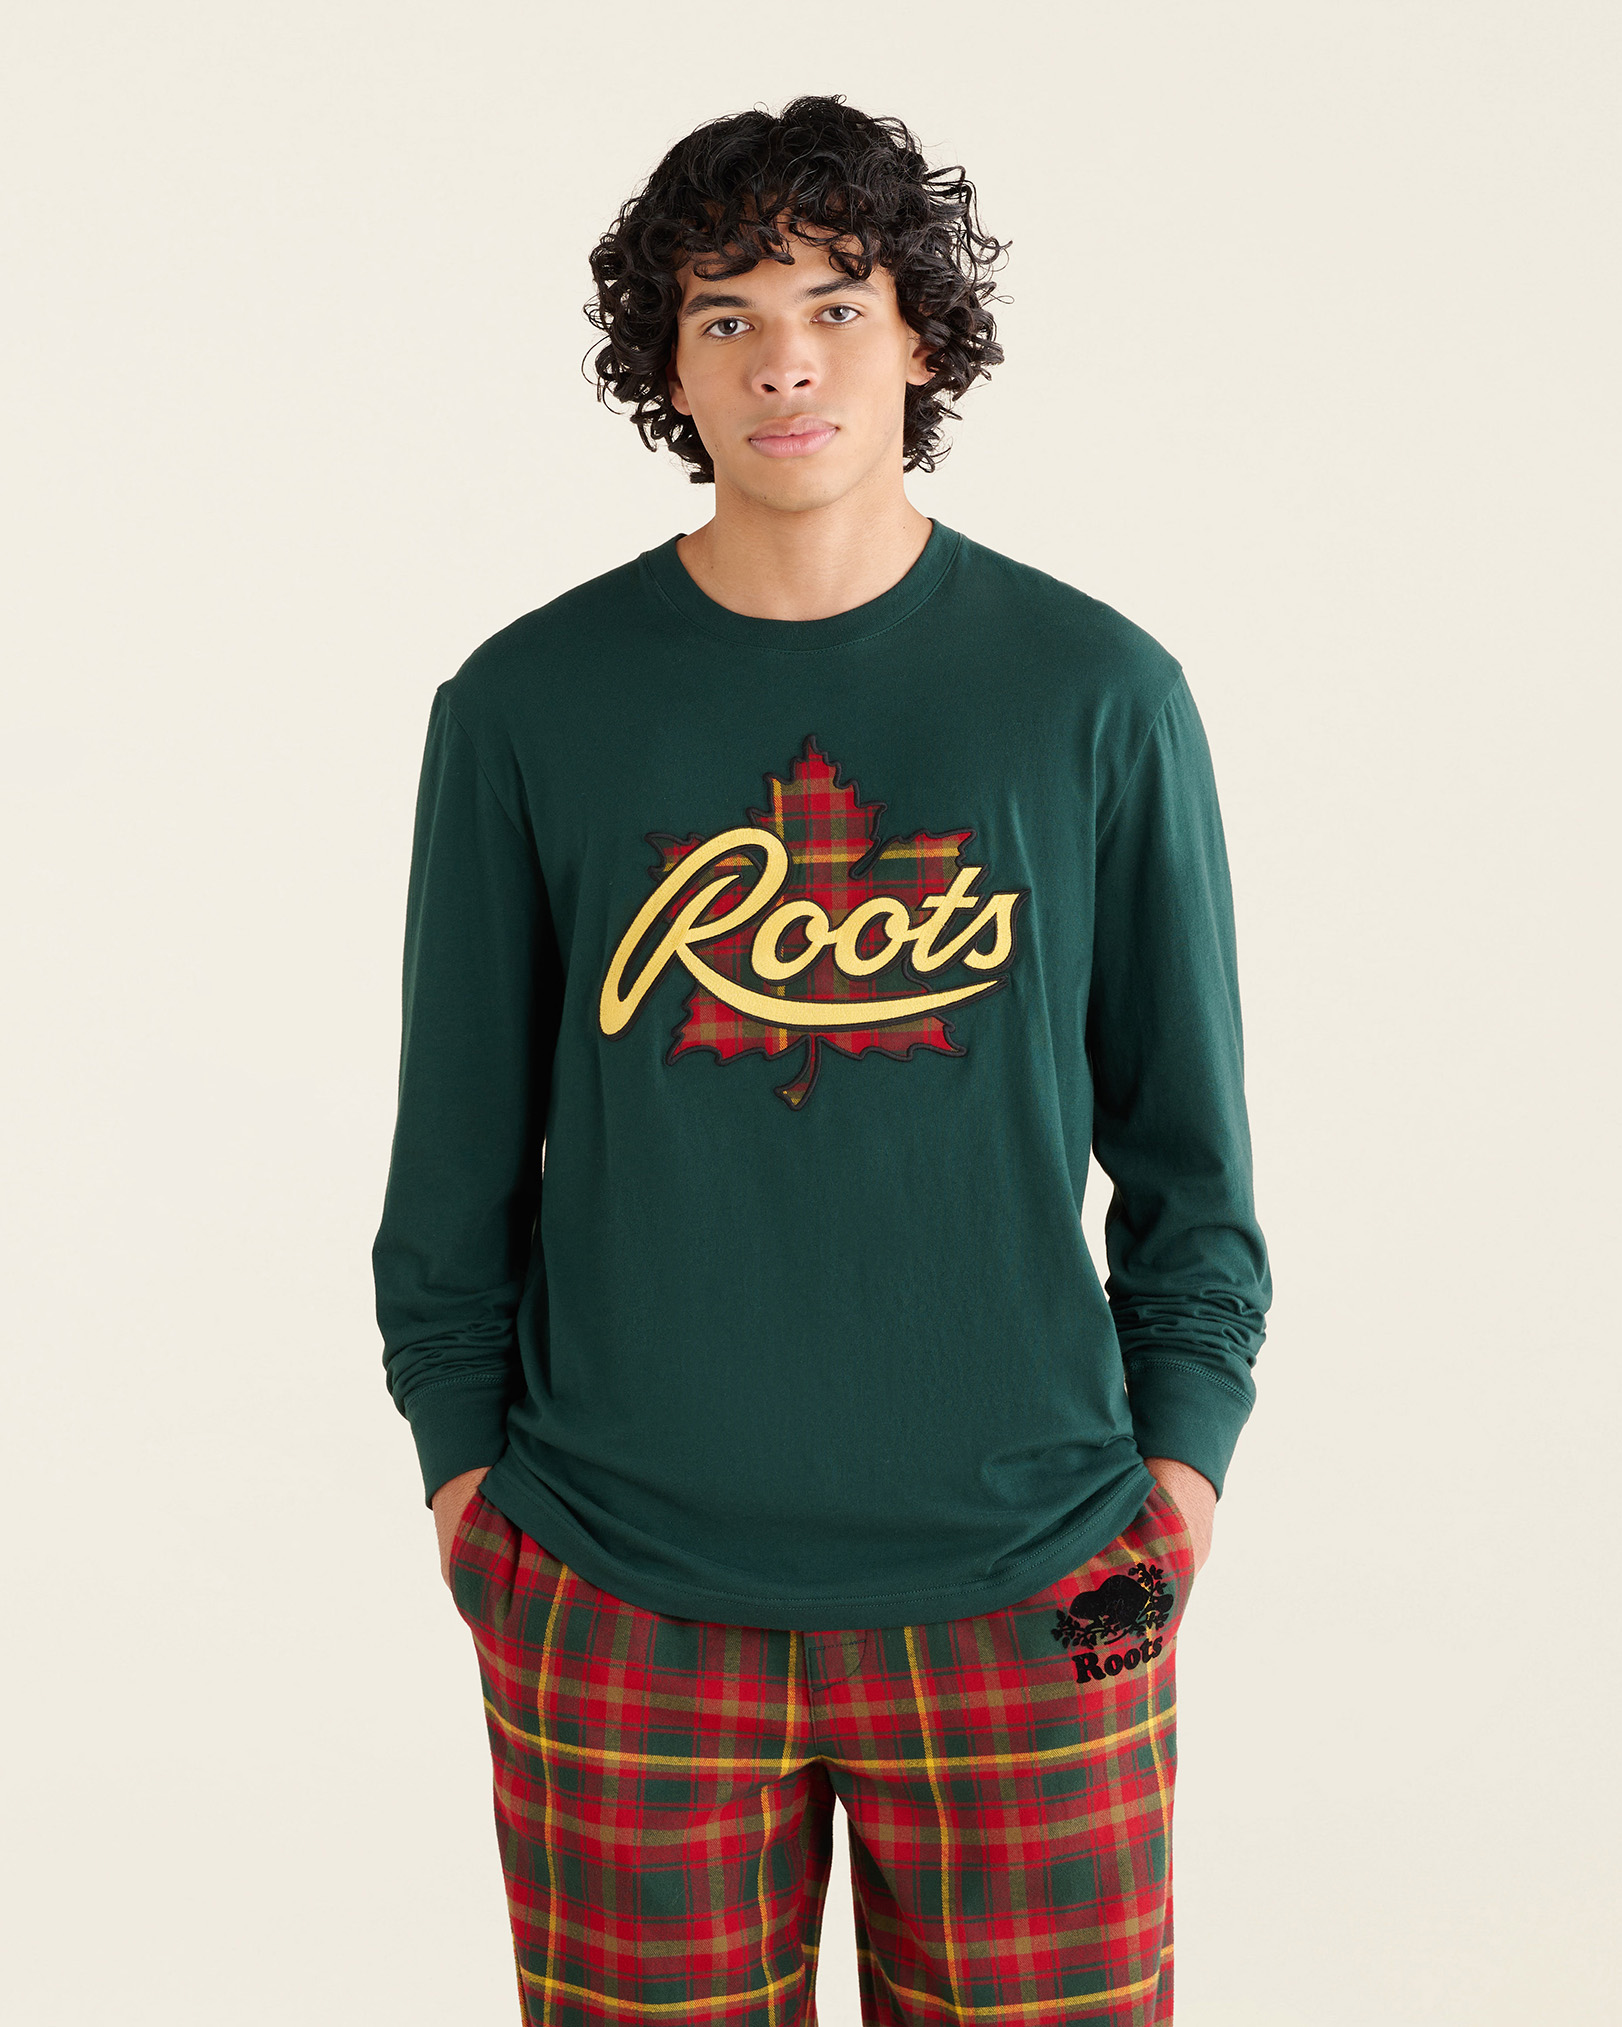 Roots Men's Leaf Plaid Fill Long Sleeve T-Shirt in Varsity Green